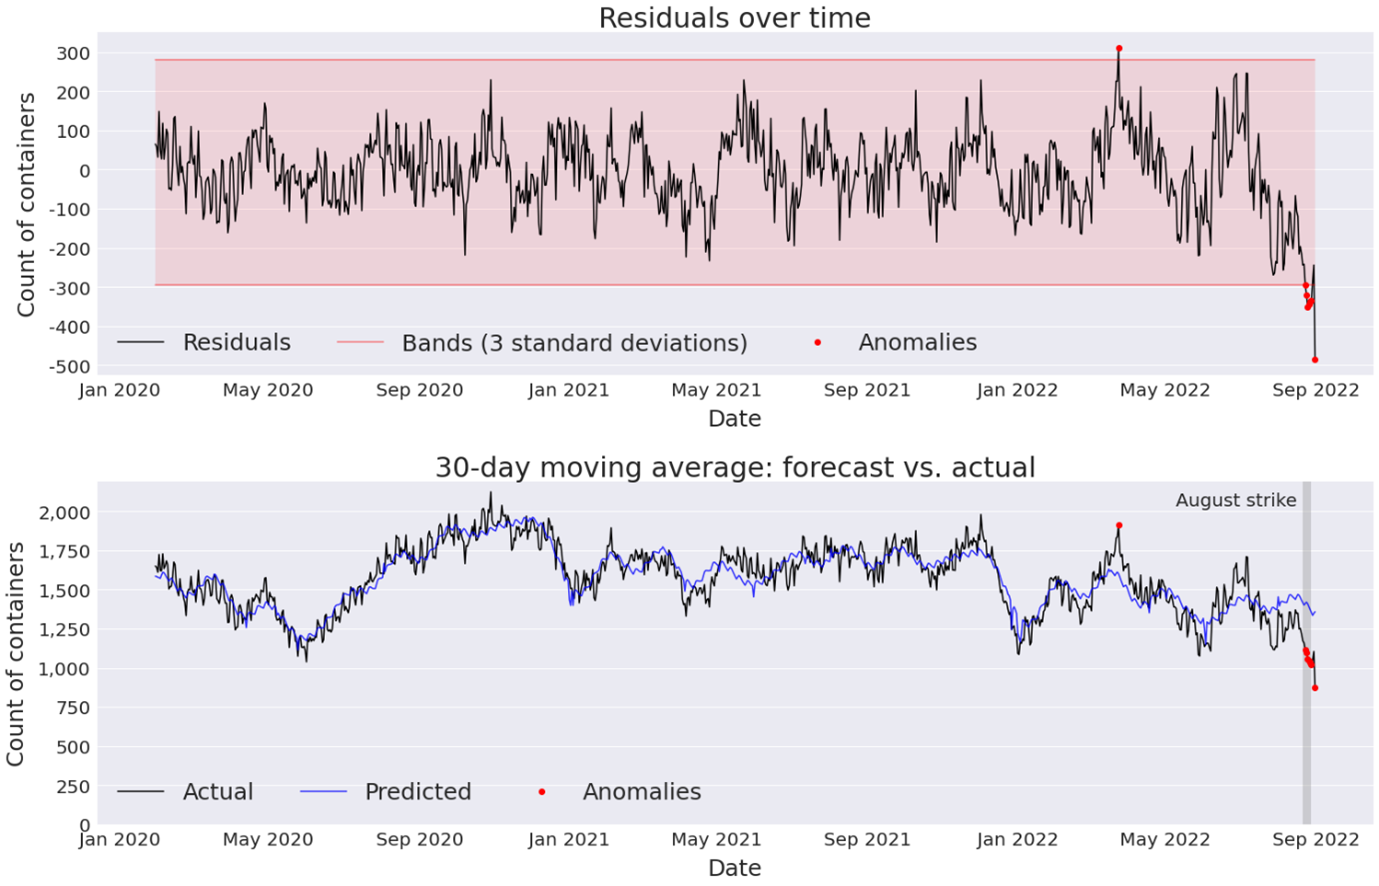 Two charts showing time series. The first shows the residual (the difference between predicted and actual values) over time for the analysis presented in the bottom chart.  

The second chart shows a time series from January 2020 to September 2022 showing the actual and predicted values of the 30-day moving average of inflowing containers at Felixstowe port over time.  

Anomalies are shown where the predicted and actual values diverge significantly. Most of these coincide with an eight-day strike that took place at Felixstowe between 21 and 29 August 2022, while another is marked in April 2022